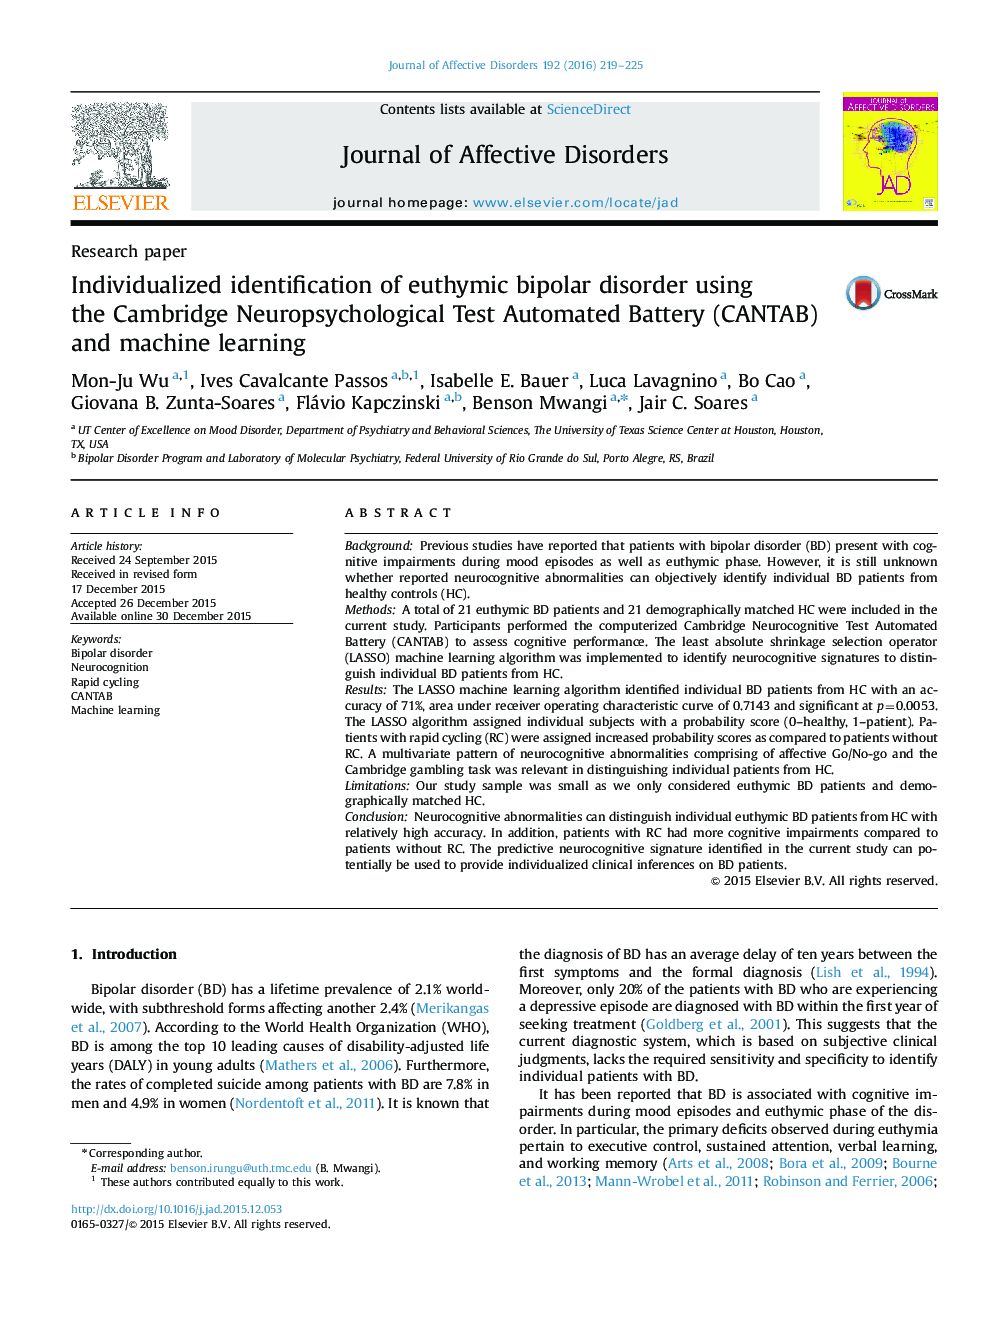 Individualized identification of euthymic bipolar disorder using the Cambridge Neuropsychological Test Automated Battery (CANTAB) and machine learning